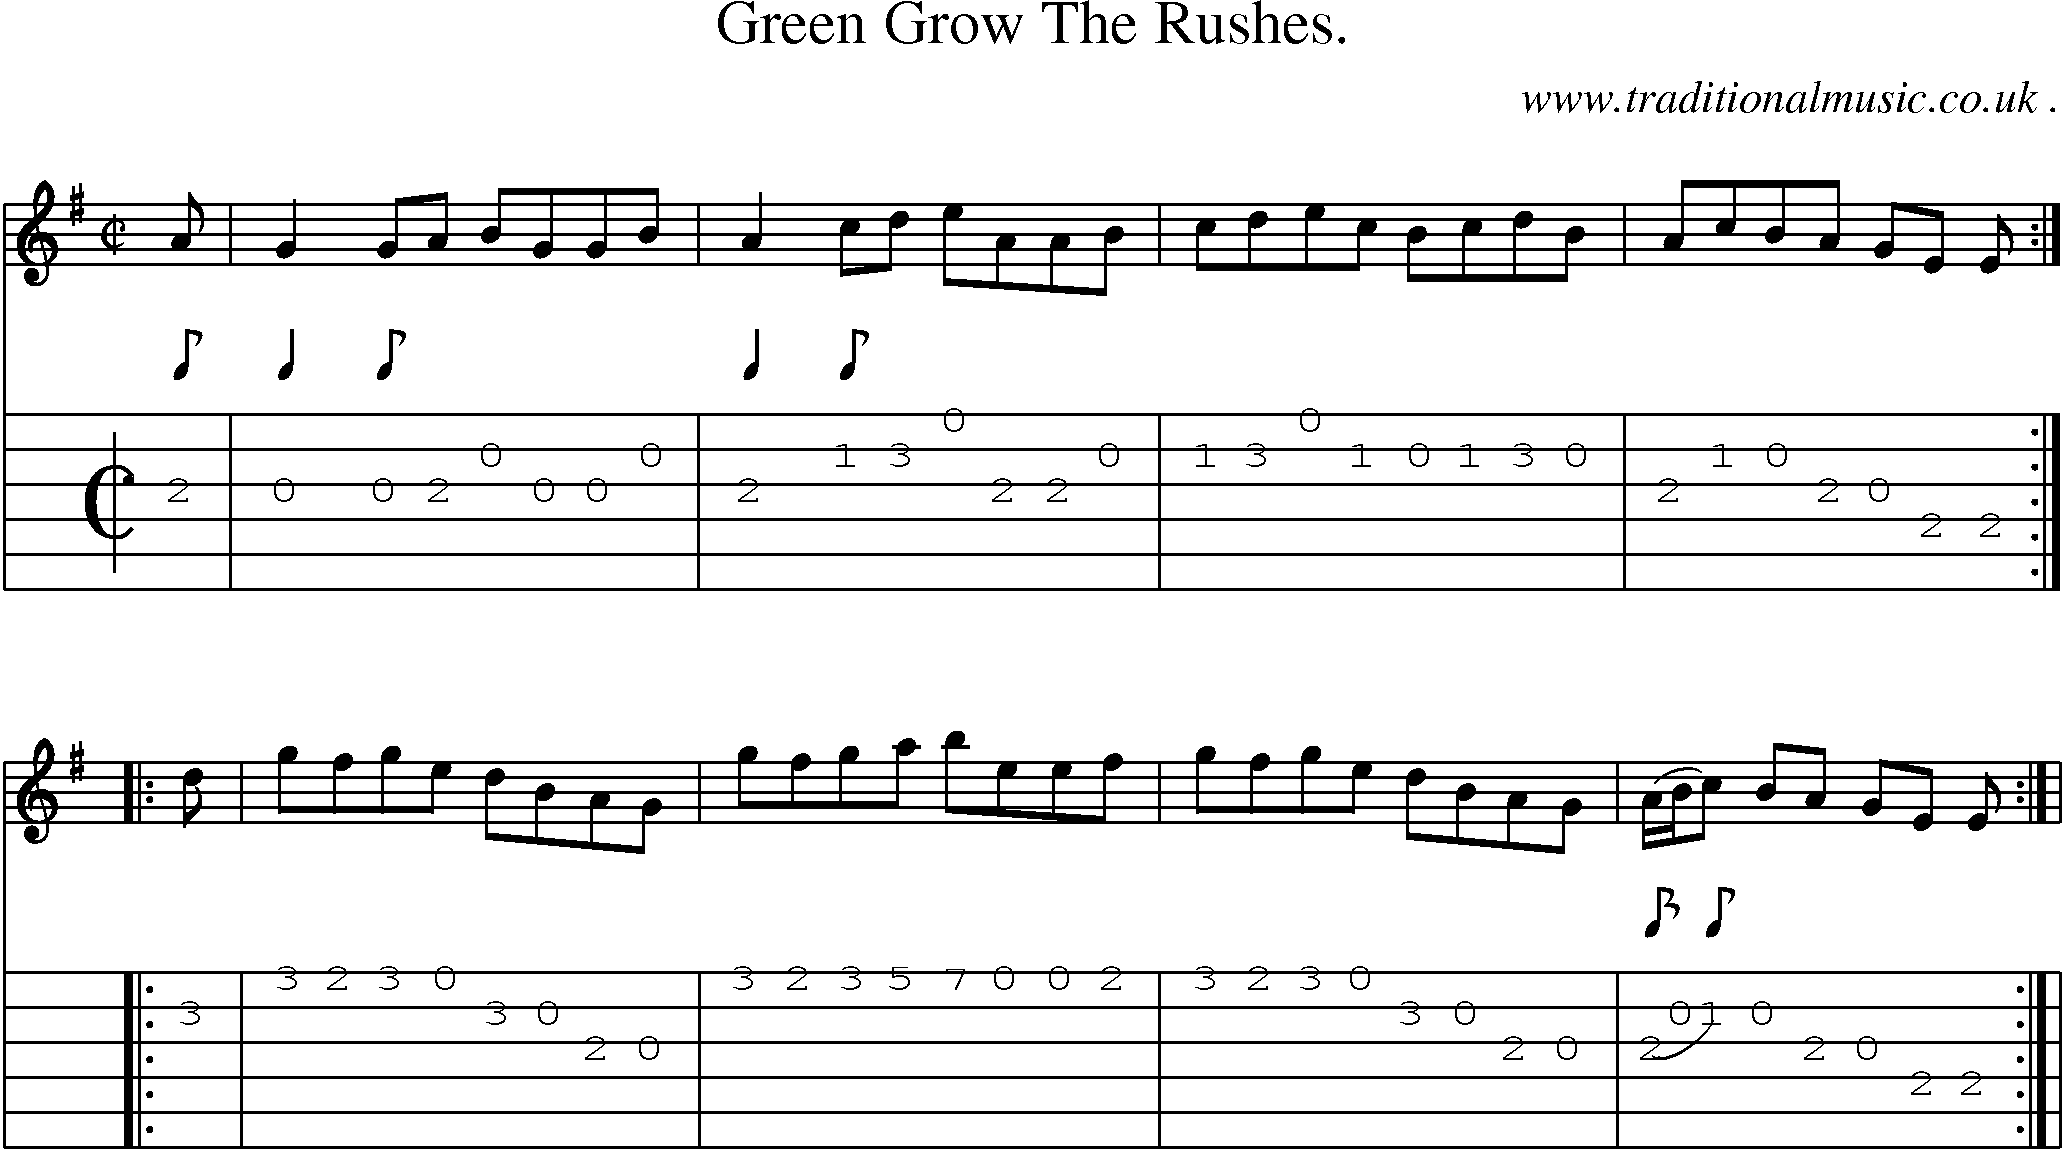 Sheet-Music and Guitar Tabs for Green Grow The Rushes